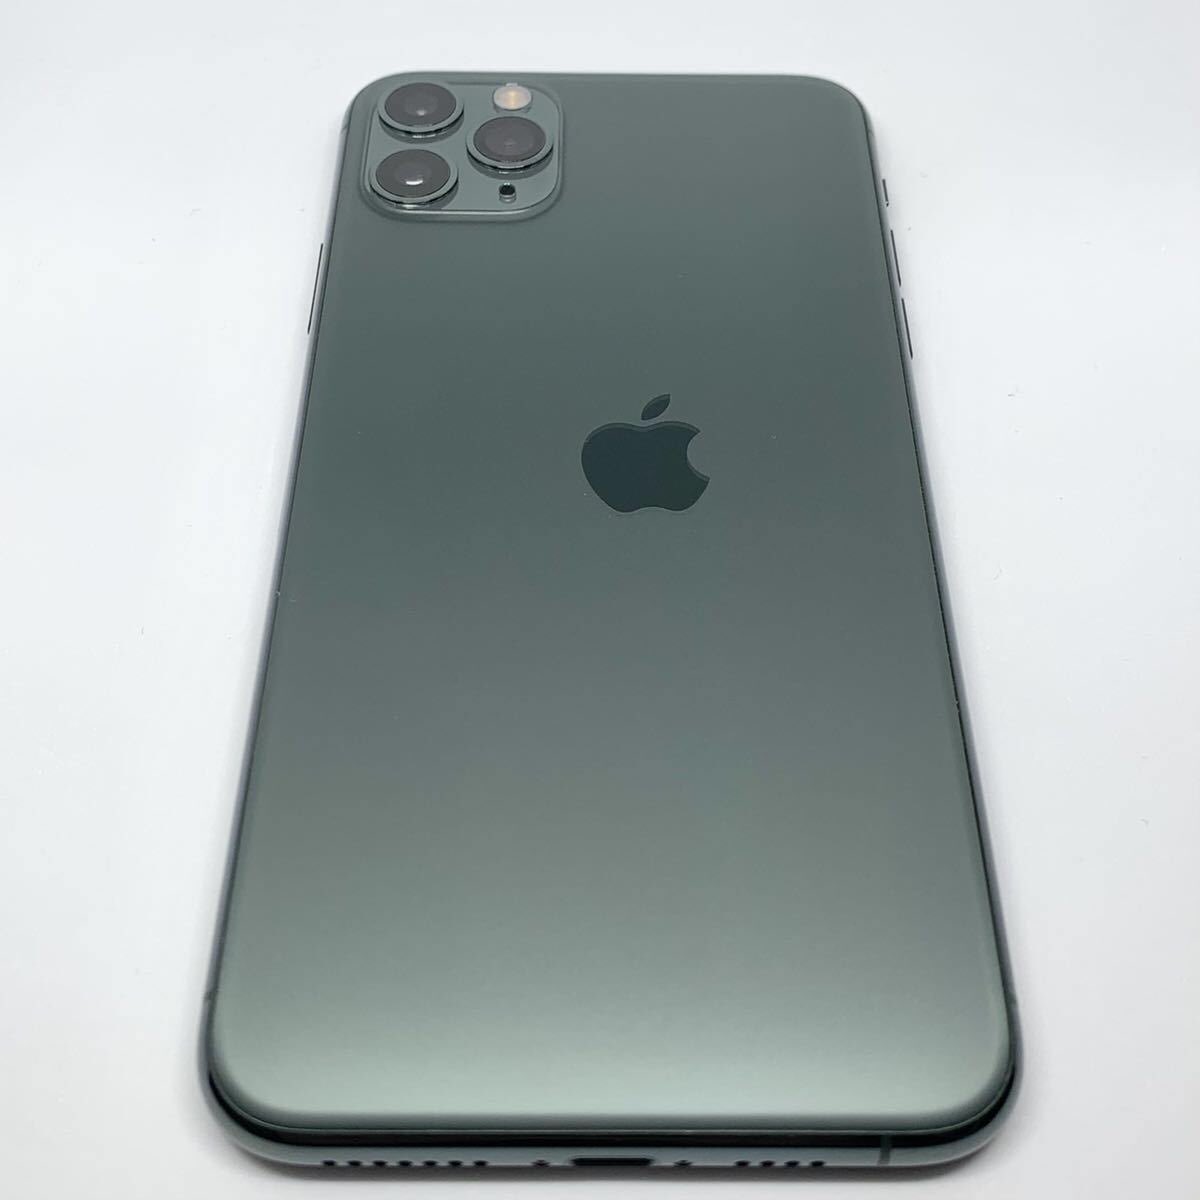 Check Out This 'Extremely Rare' iPhone 11 Pro With a Misaligned Apple Logo [Photos]